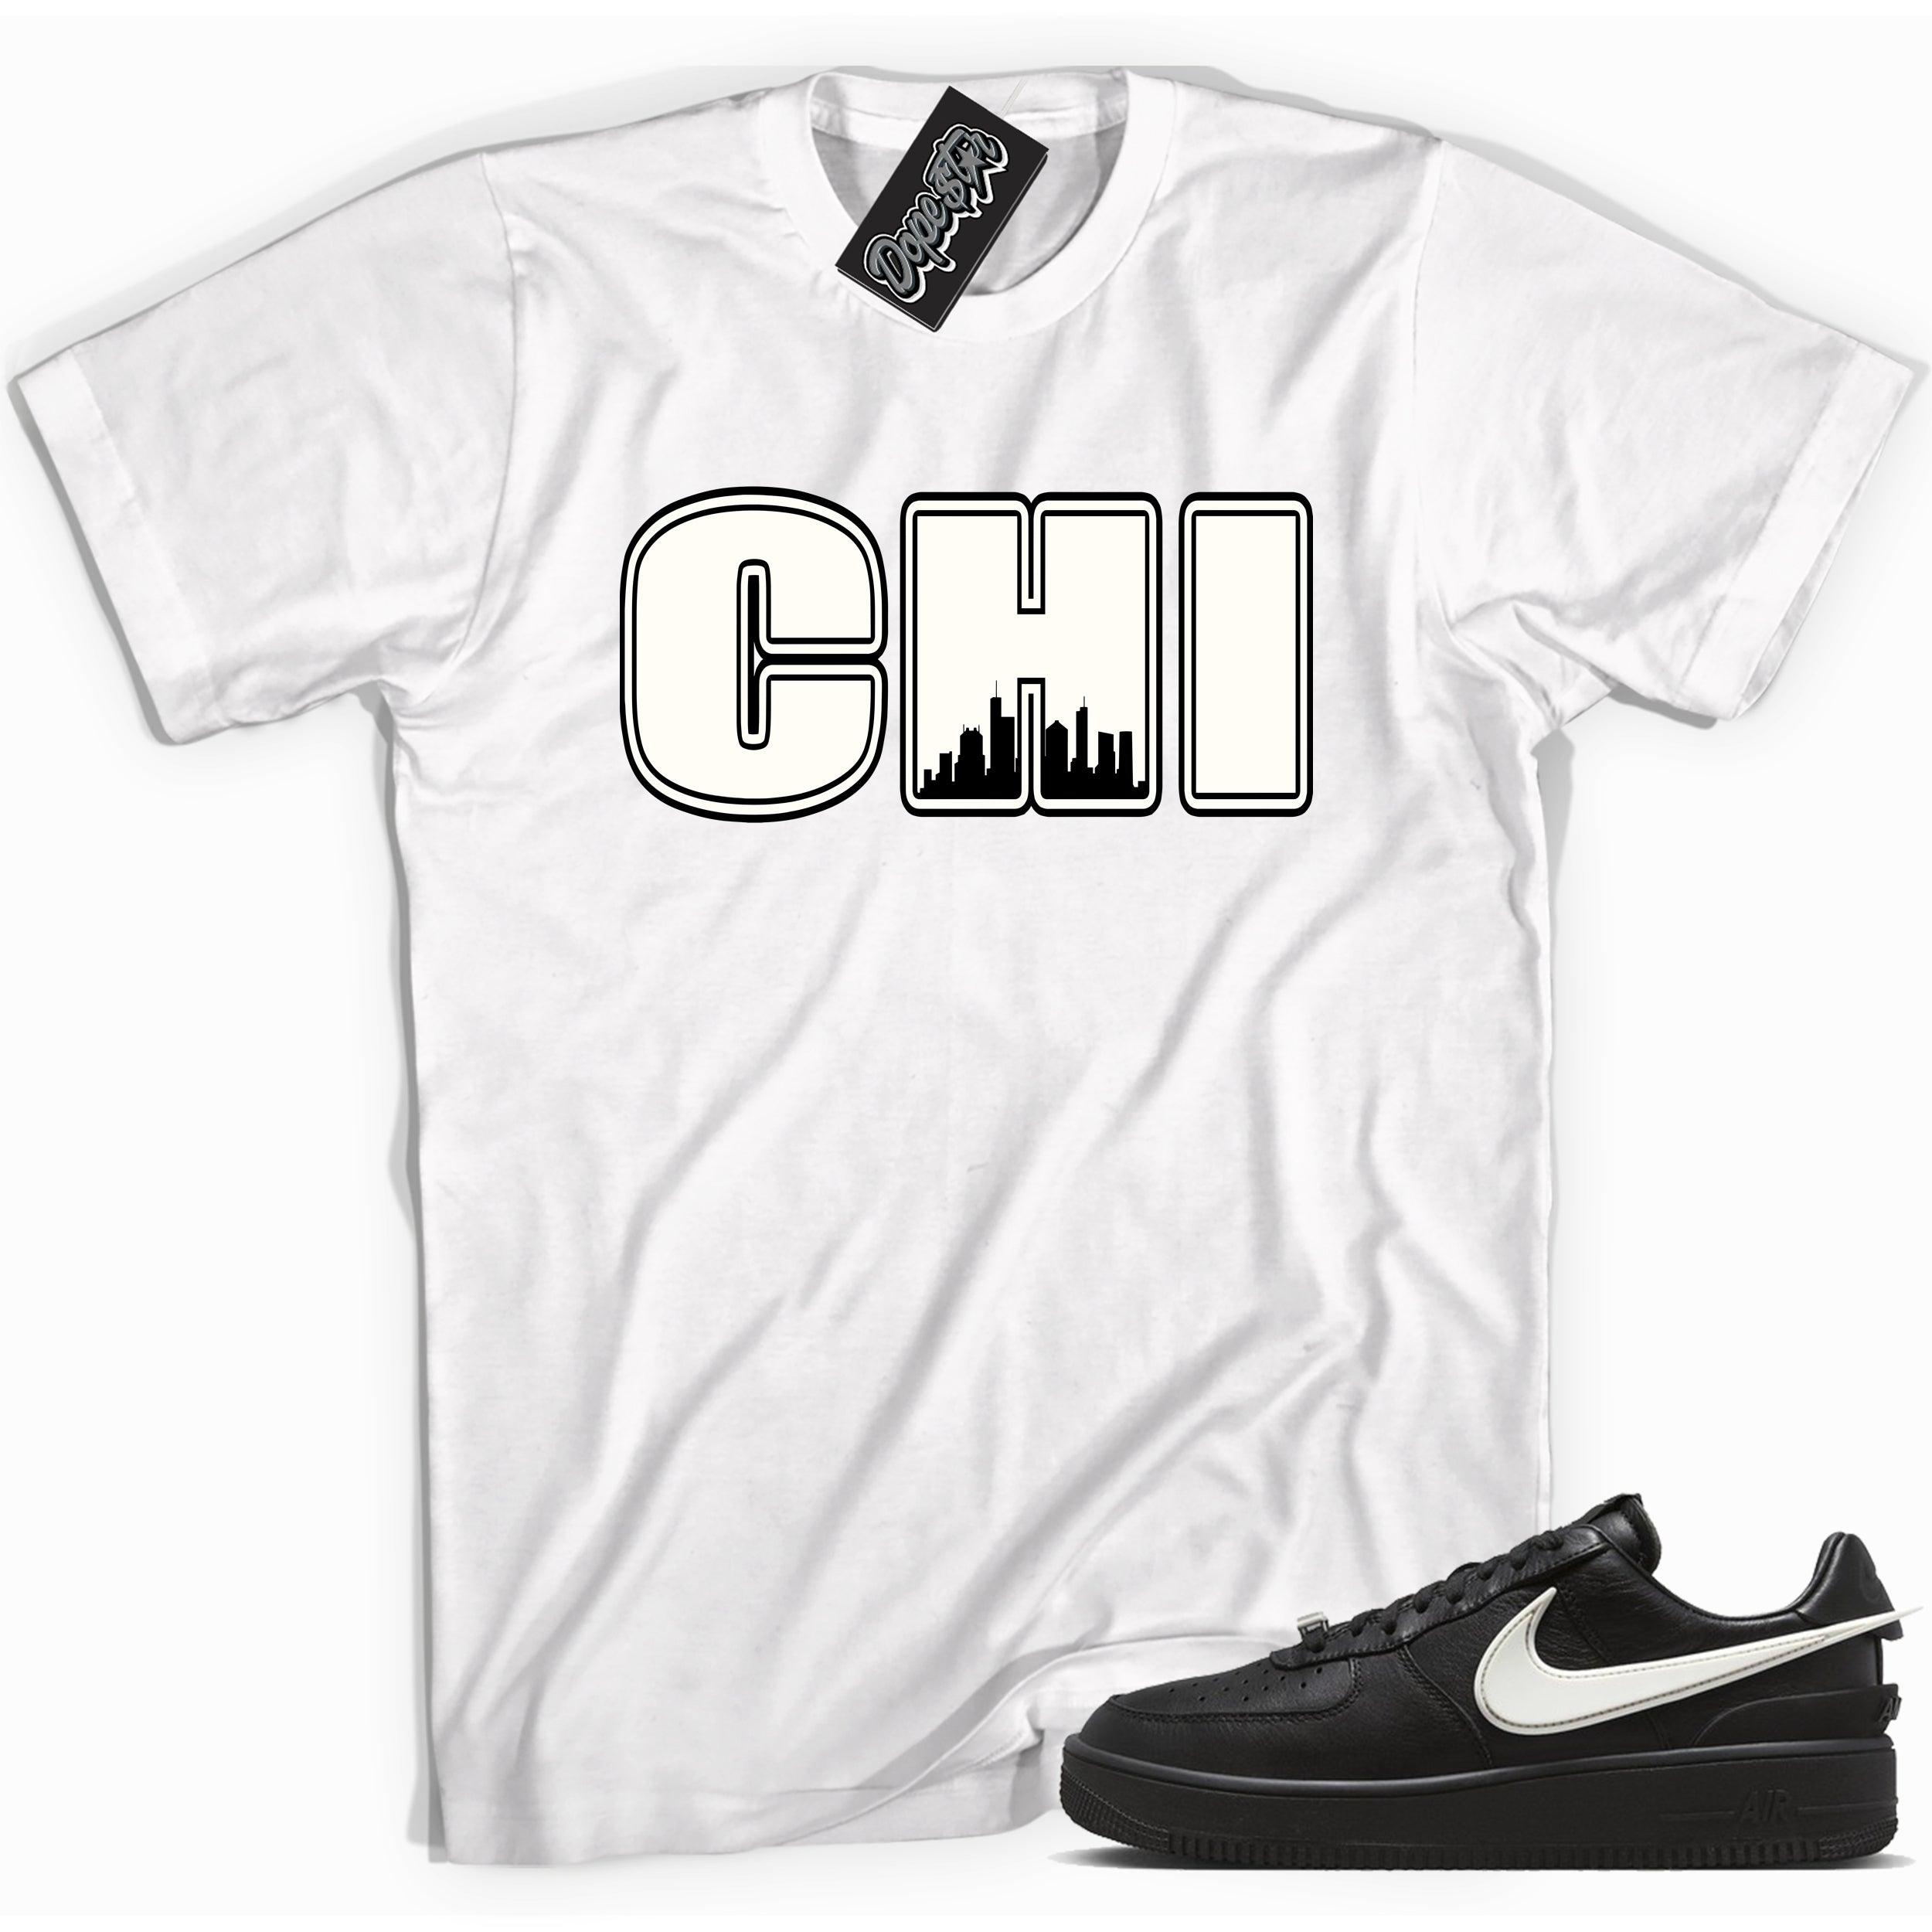 Cool white graphic tee with 'Chicago CHI TOWN' print, that perfectly matches Nike Air Force 1 Low SP Ambush Phantom sneakers.